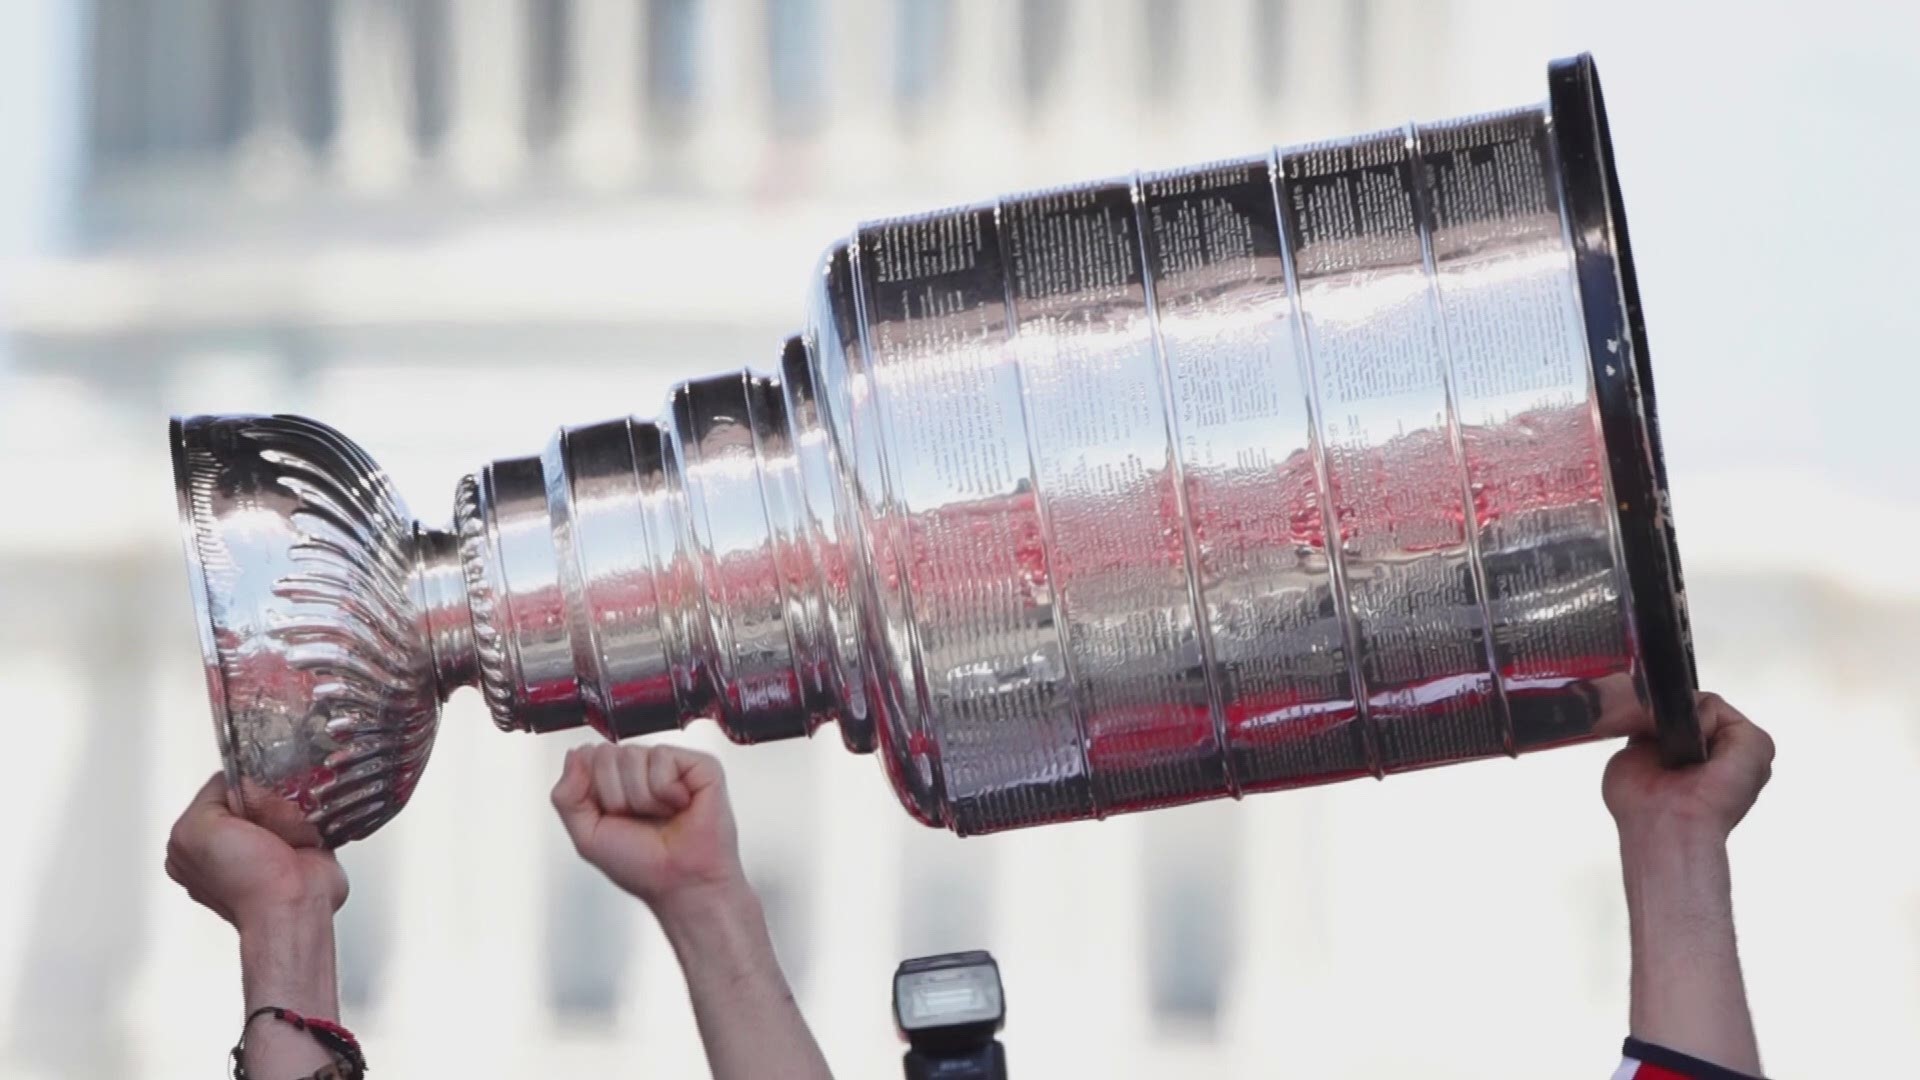 This is how the Stanley Cup got its start in the world of professional hockey.